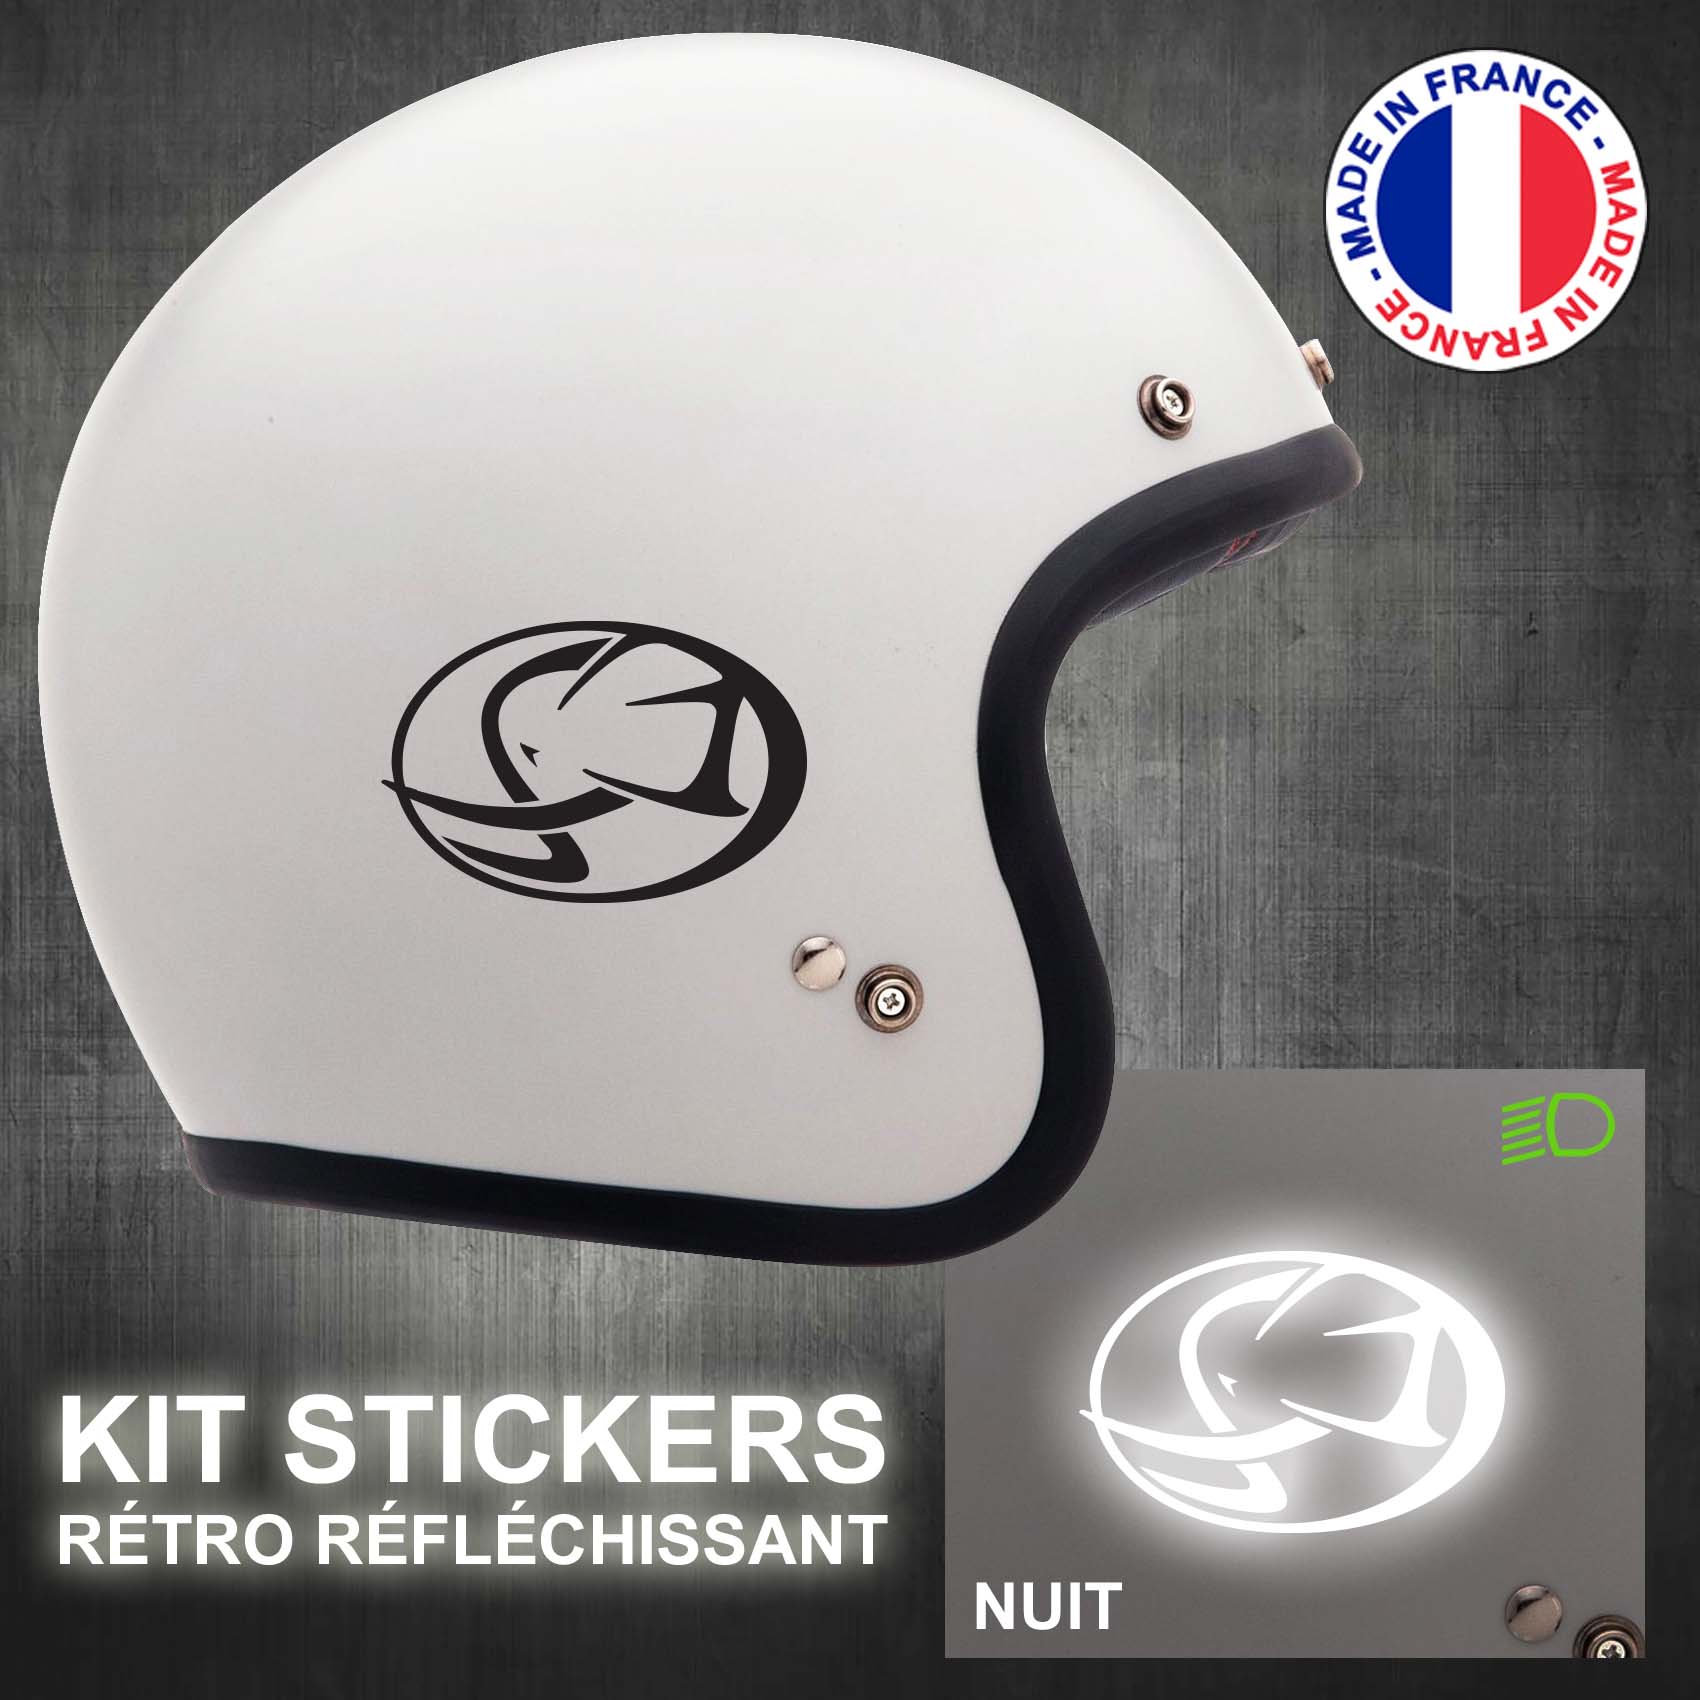 stickers-casque-moto-cagiva-ref3-retro-reflechissant-autocollant-moto-velo-tuning-racing-route-sticker-casques-adhesif-scooter-nuit-securite-decals-personnalise-personnalisable-min